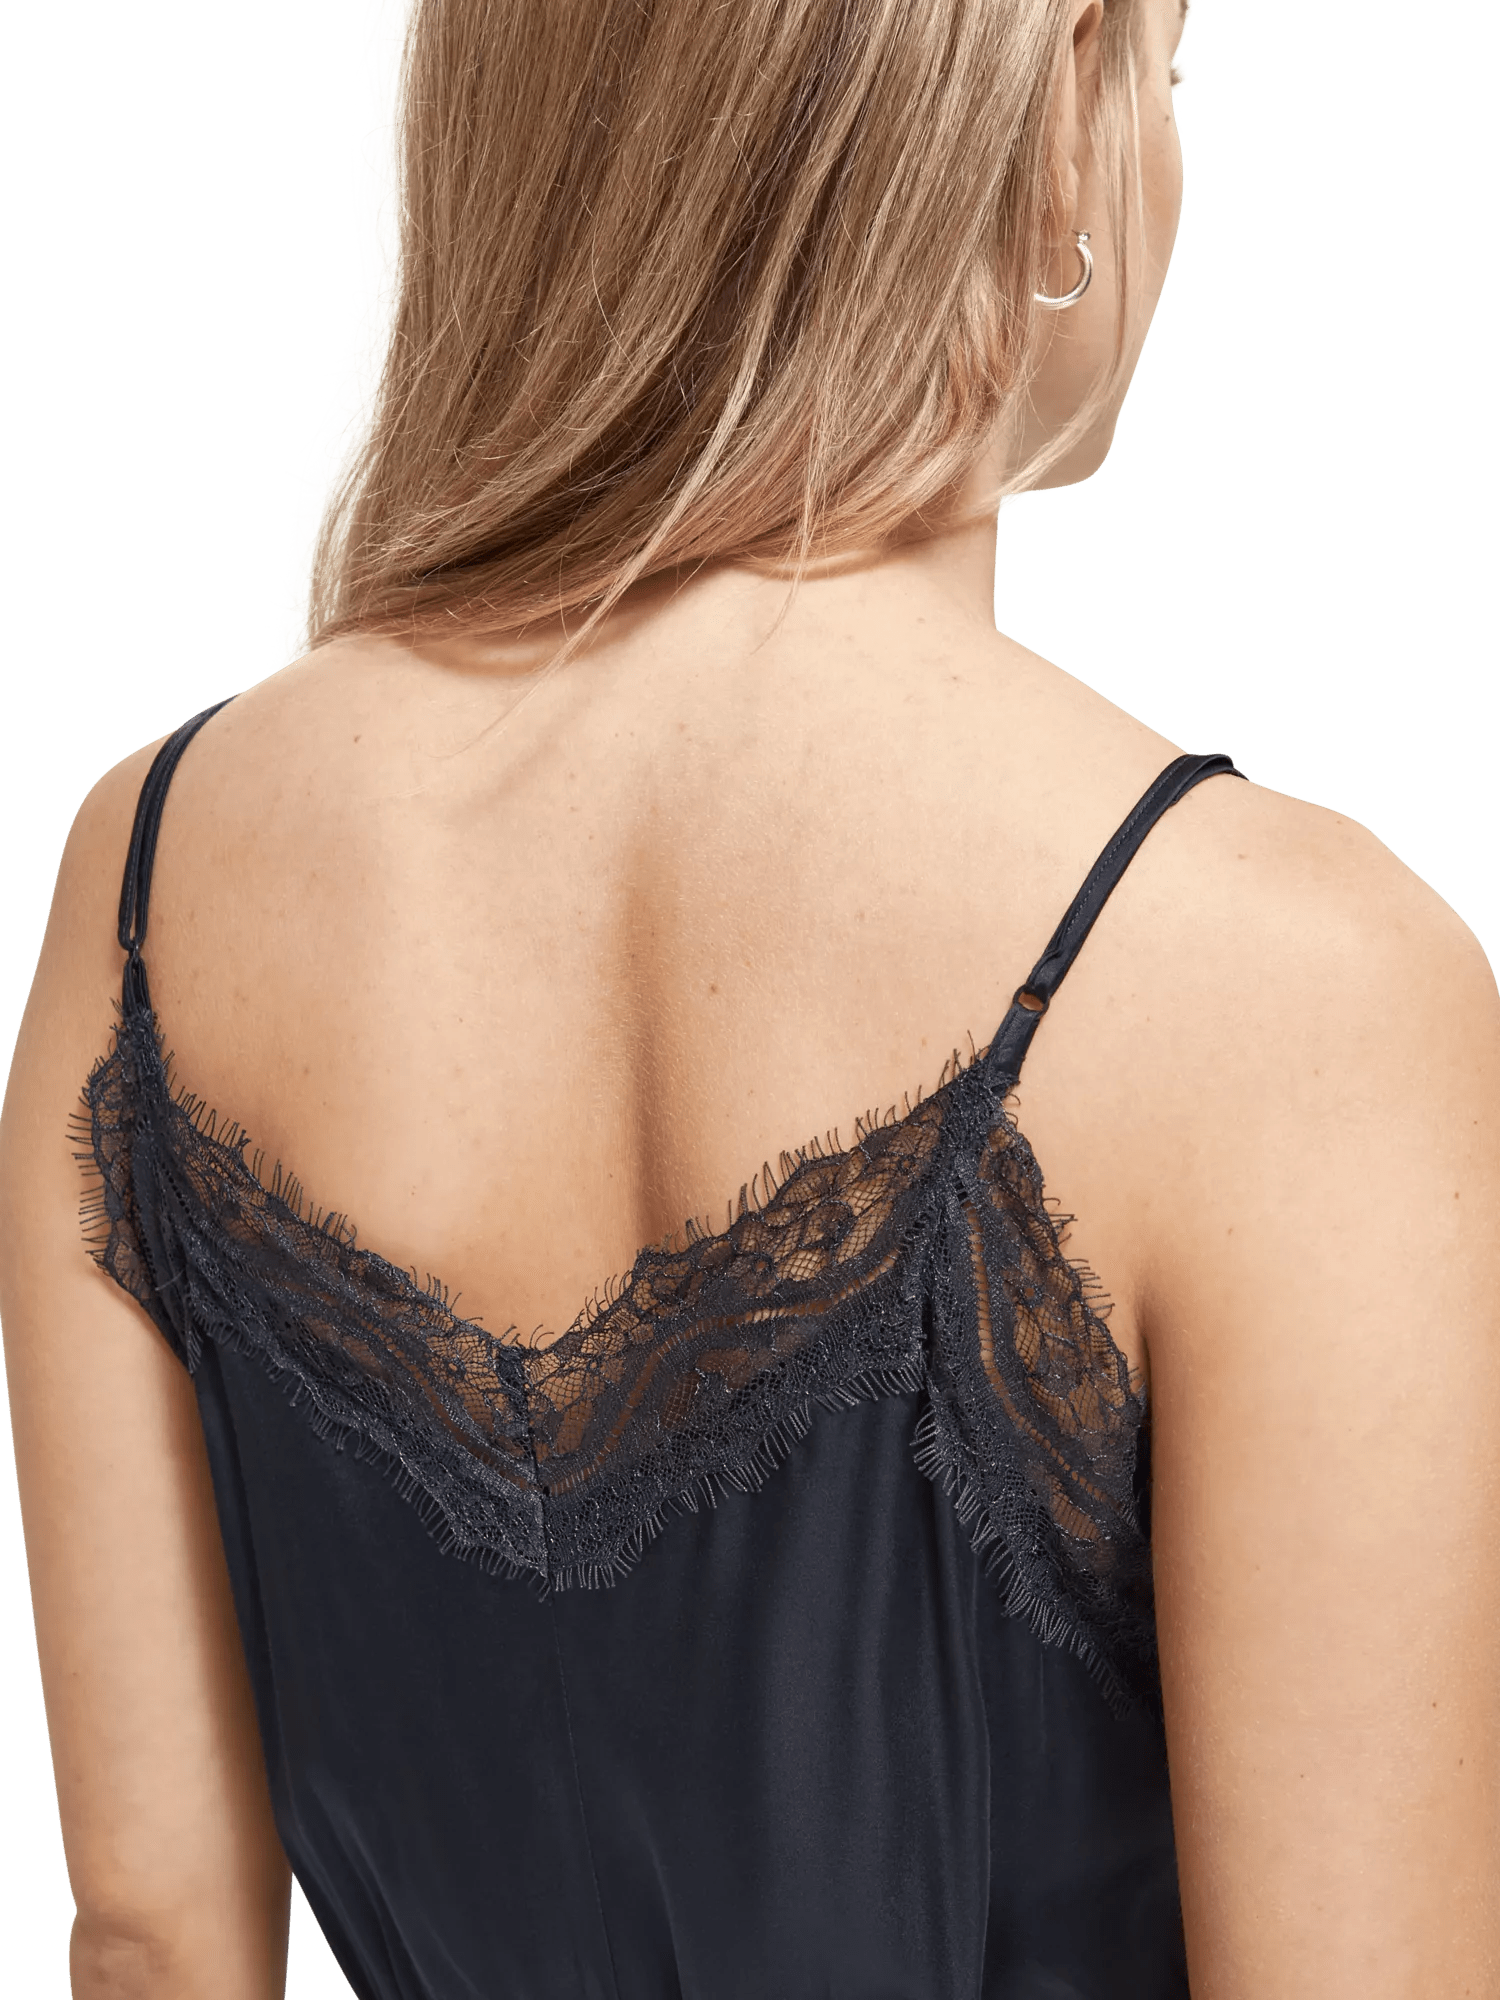 Lace camisole top